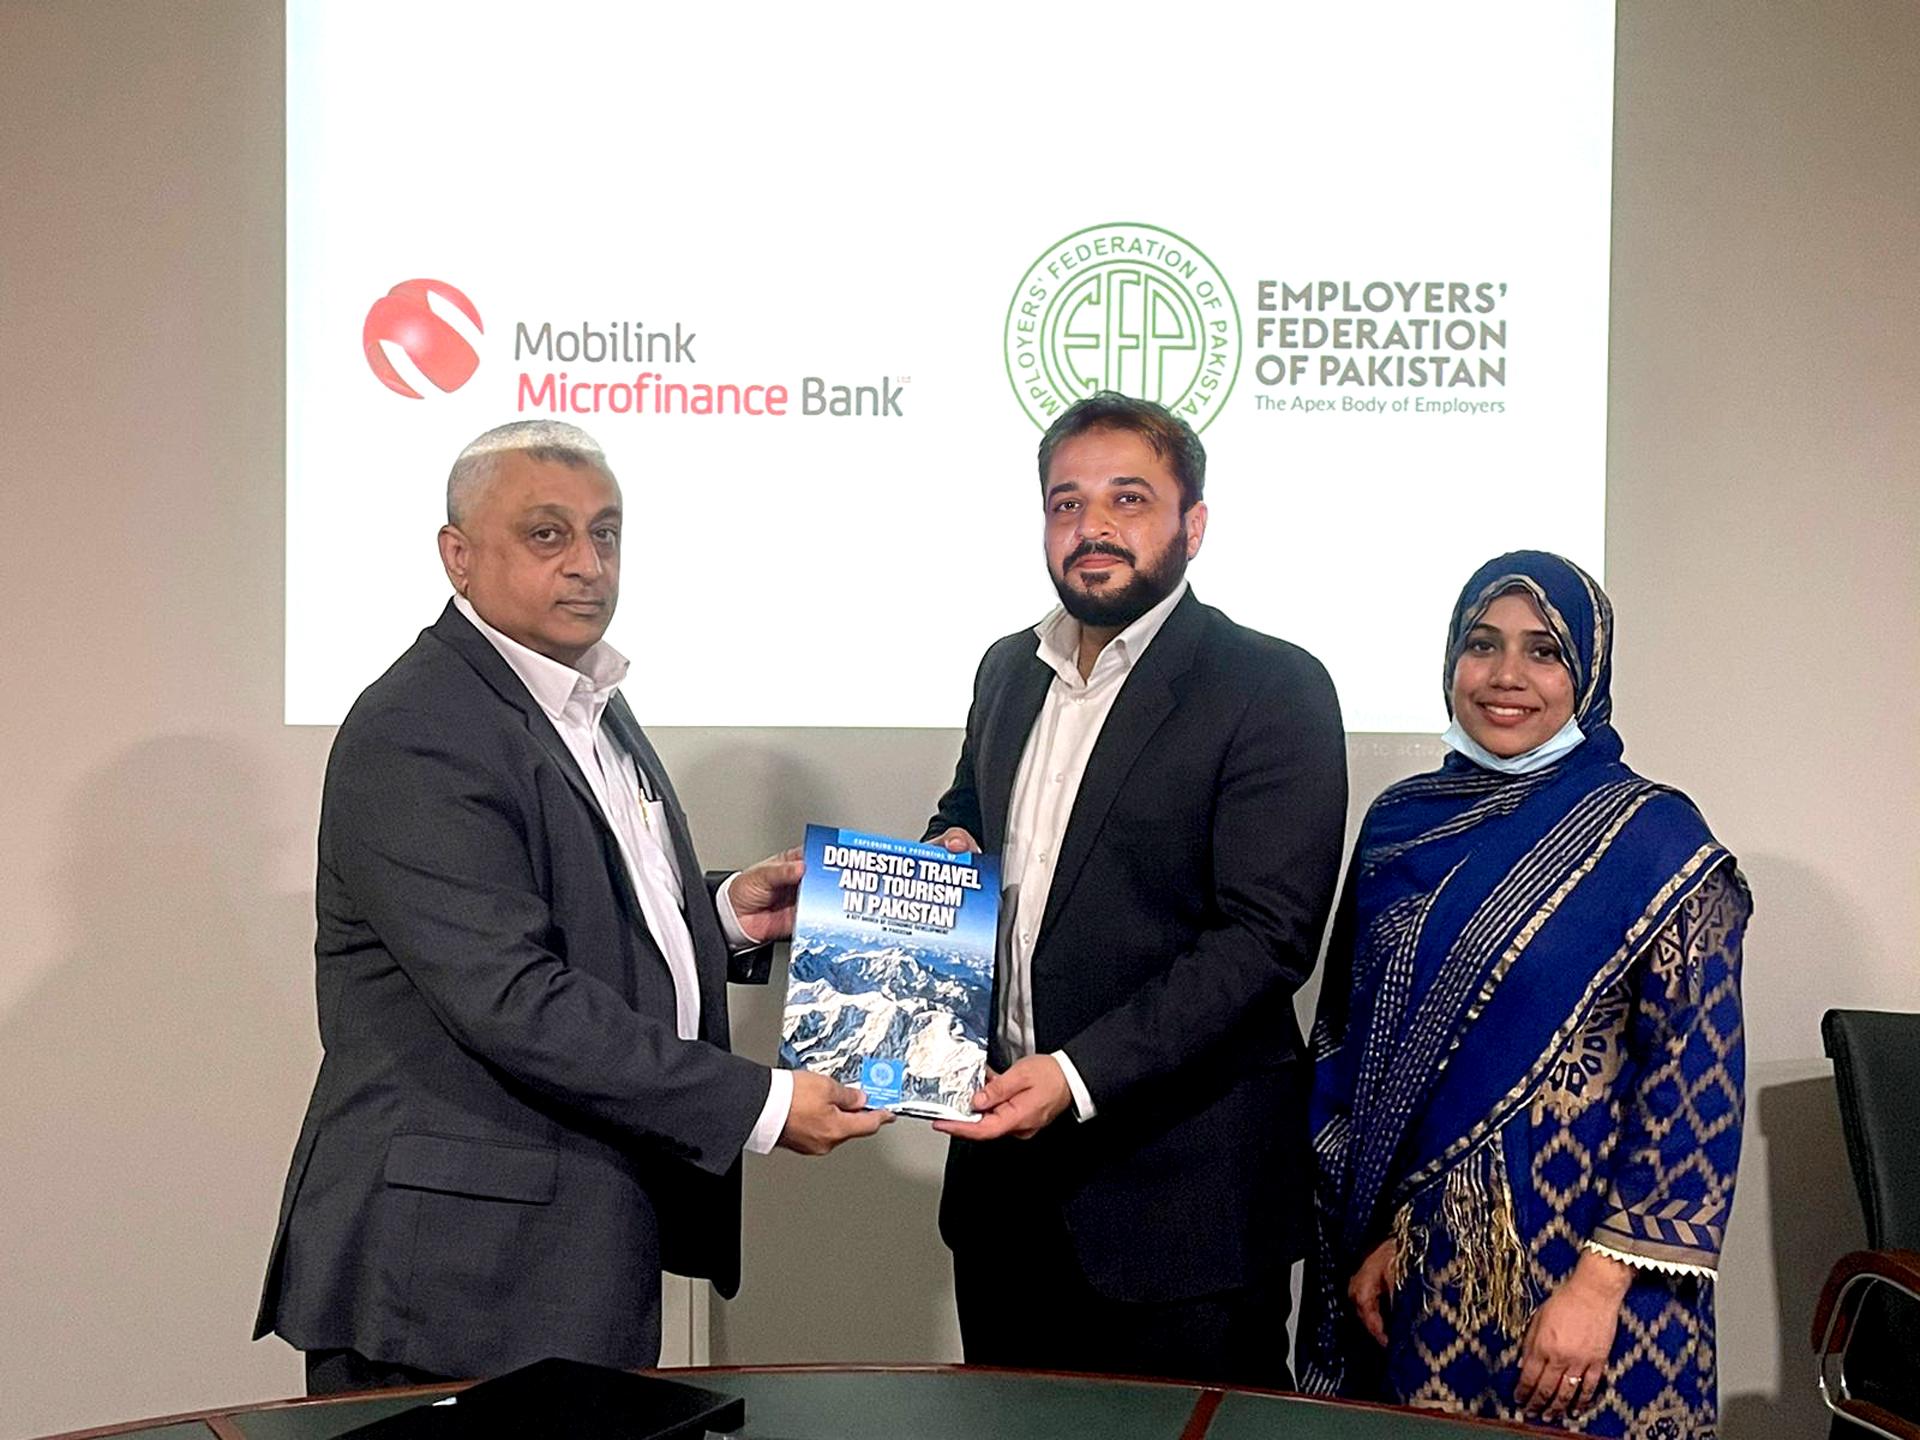 Mobilink Microfinance Bank becomes first Microfinance Institution to secure EFP Membership